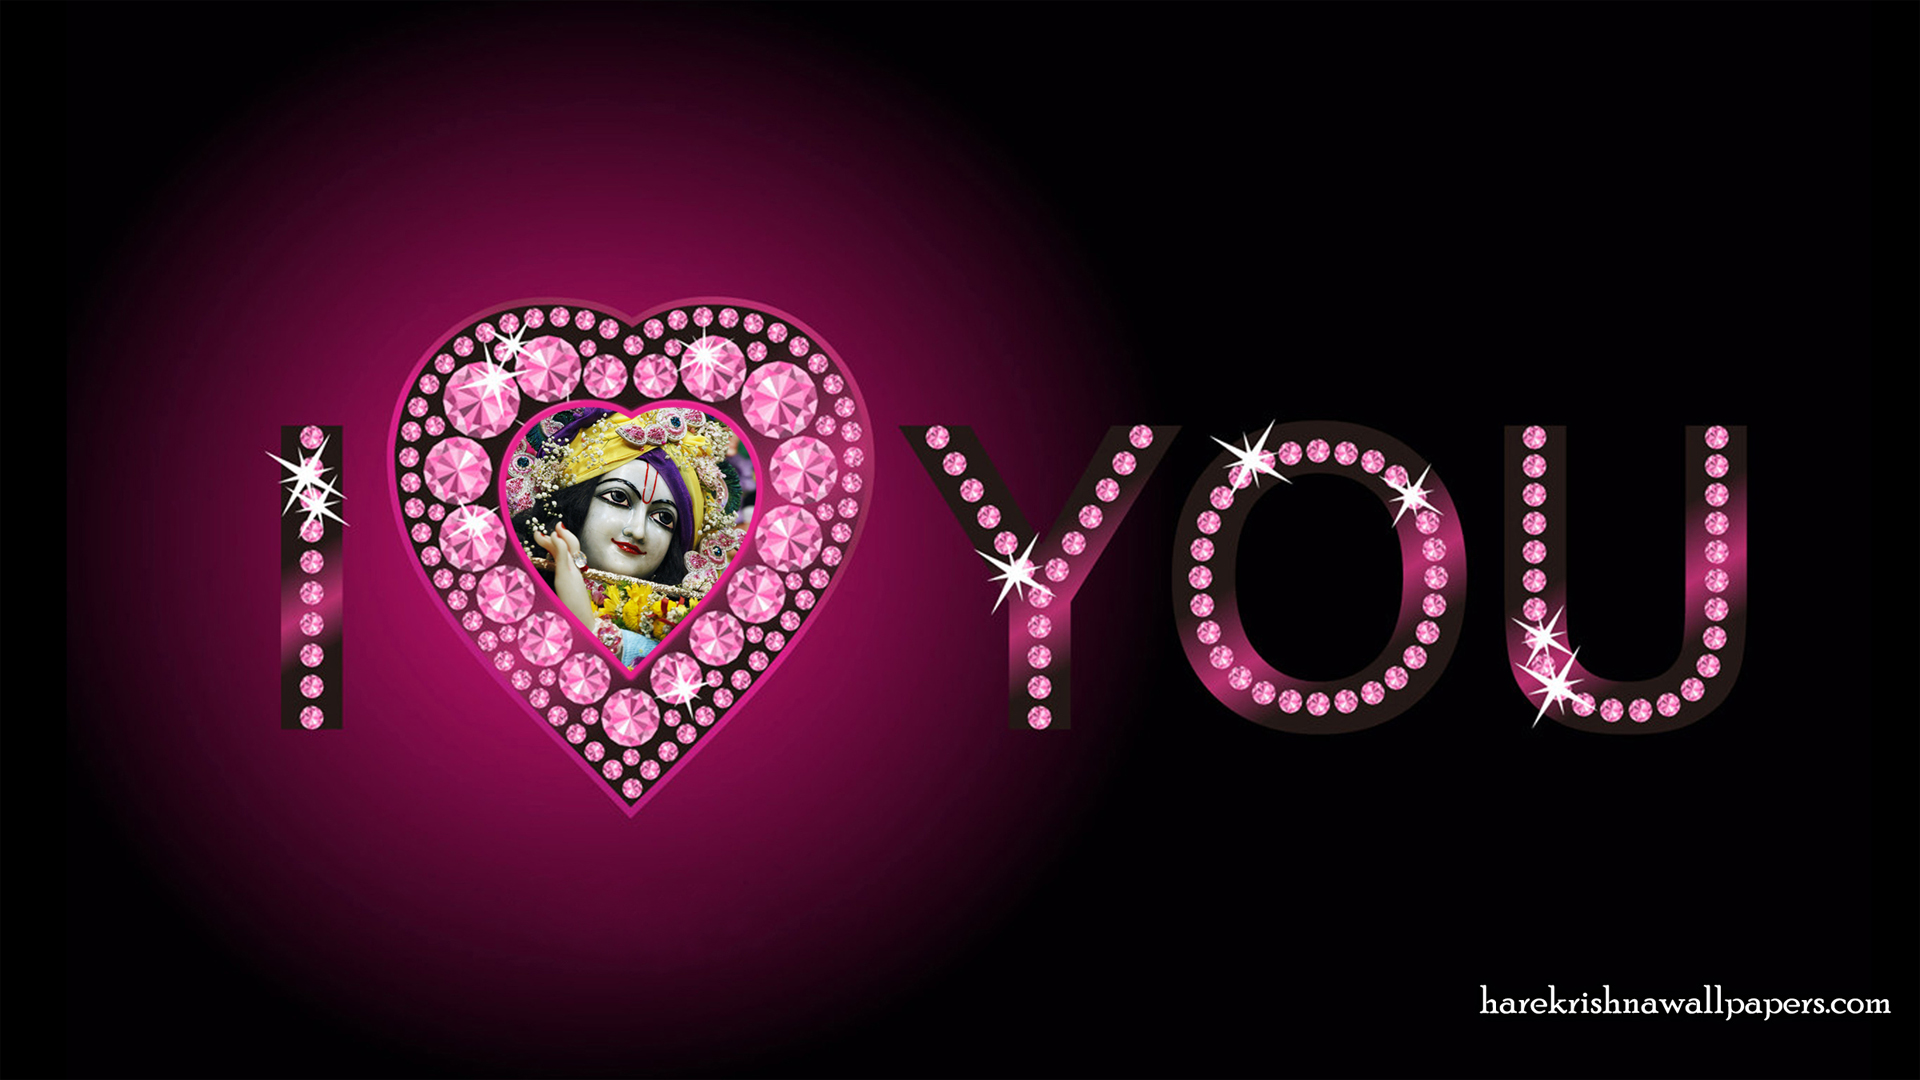 I Love You Gopinath Wallpaper (002) Size 1920x1080 Download